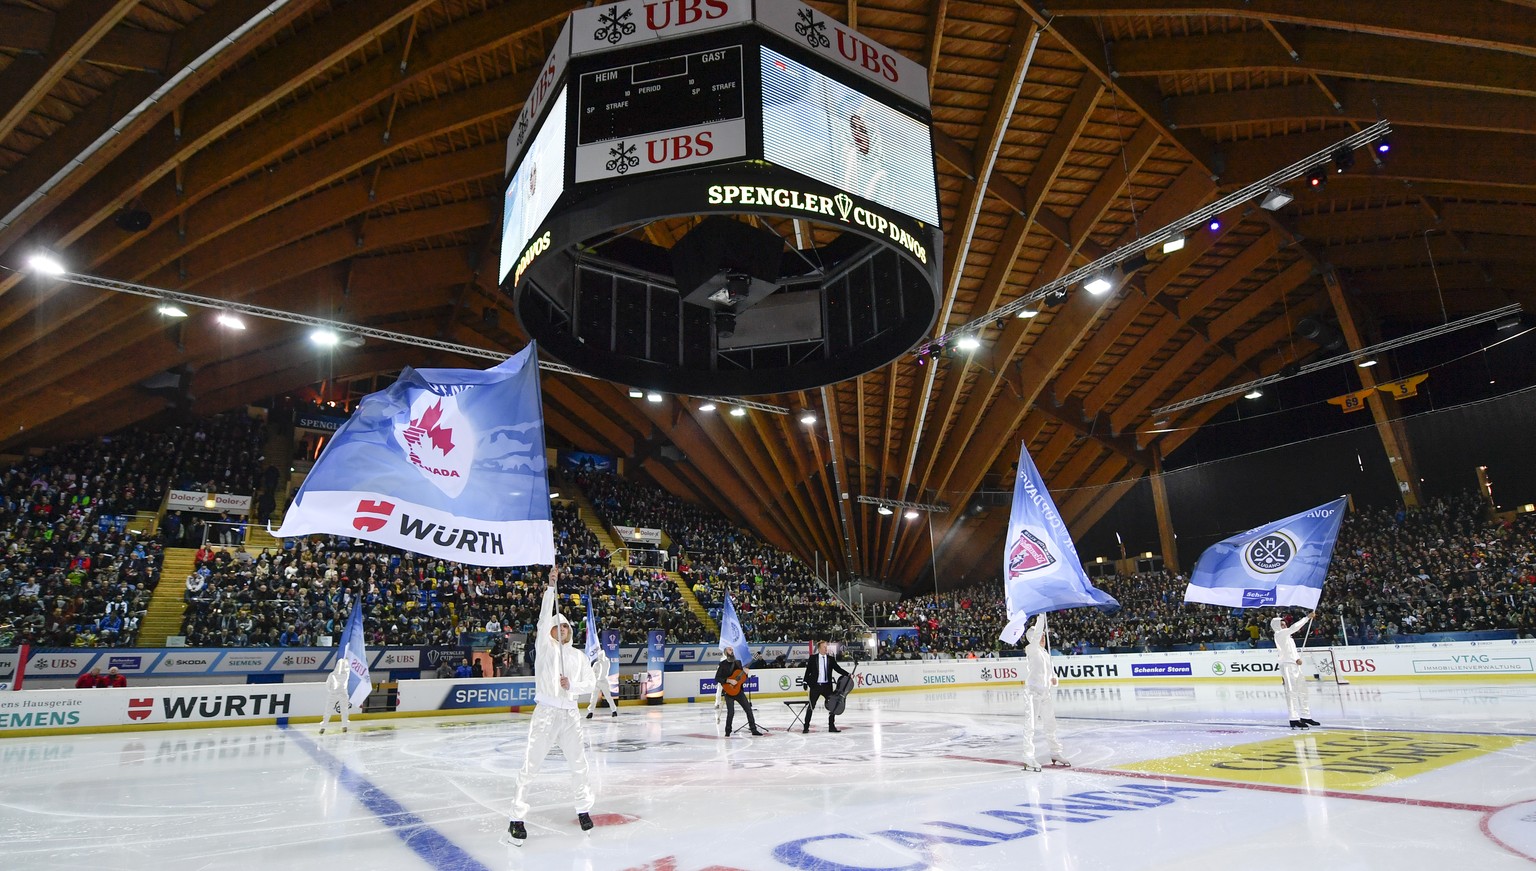 General view of the opening ceremony prior the game between HC Lugano and Avtomobilist Yekaterinburg, at the 90th Spengler Cup ice hockey tournament in Davos, Switzerland, Monday, December 26, 2016. ( ...